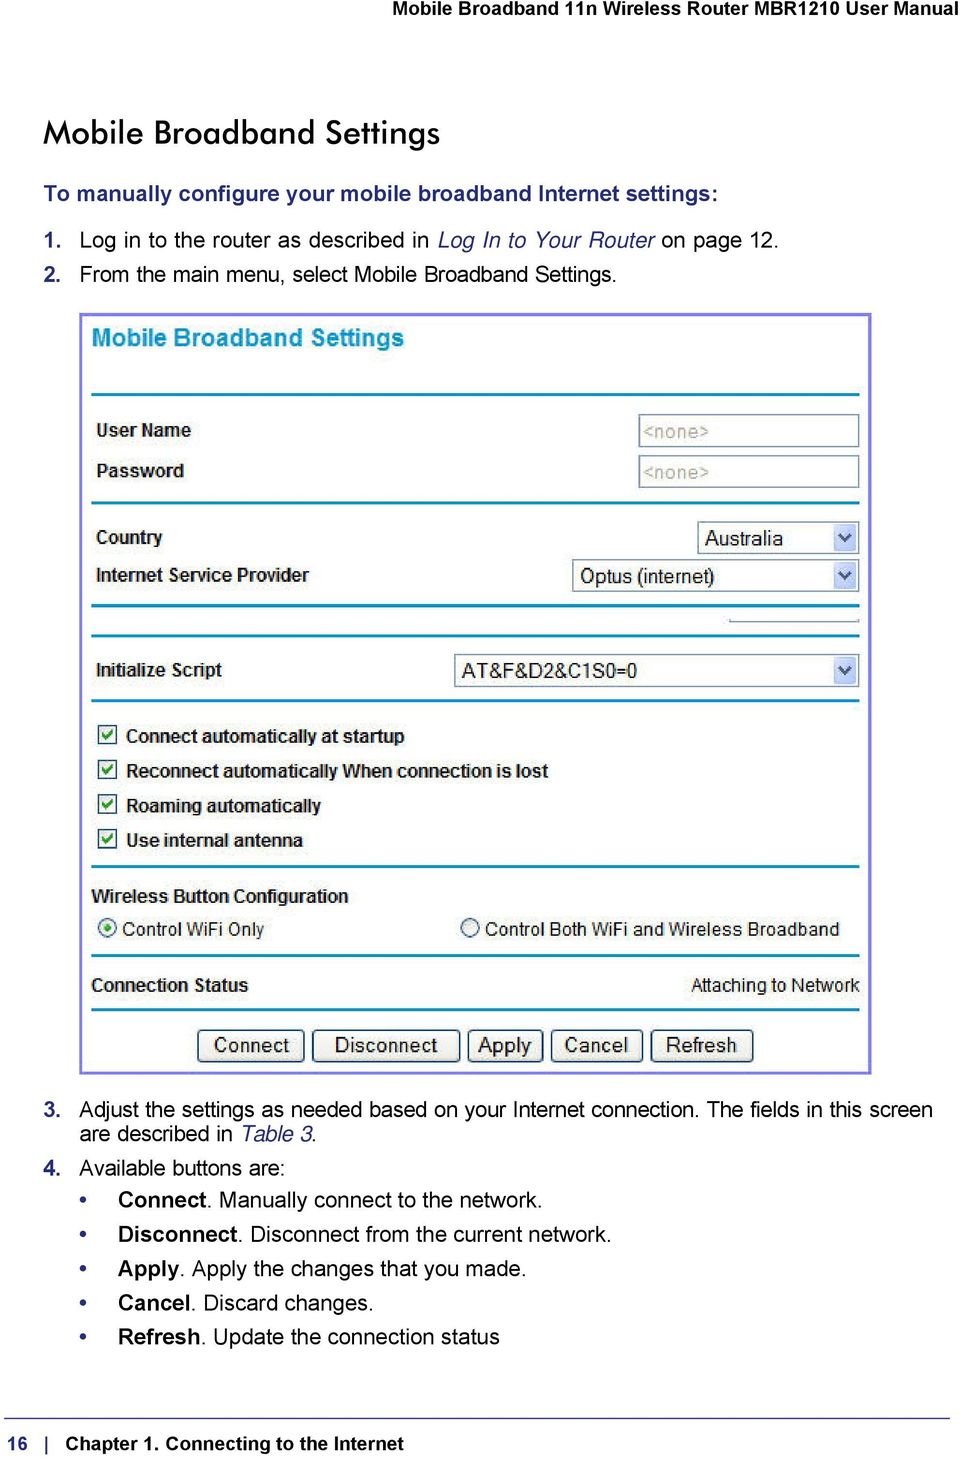 Adjust the settings as needed based on your Internet connection. The fields in this screen are described in Table 3. 4.